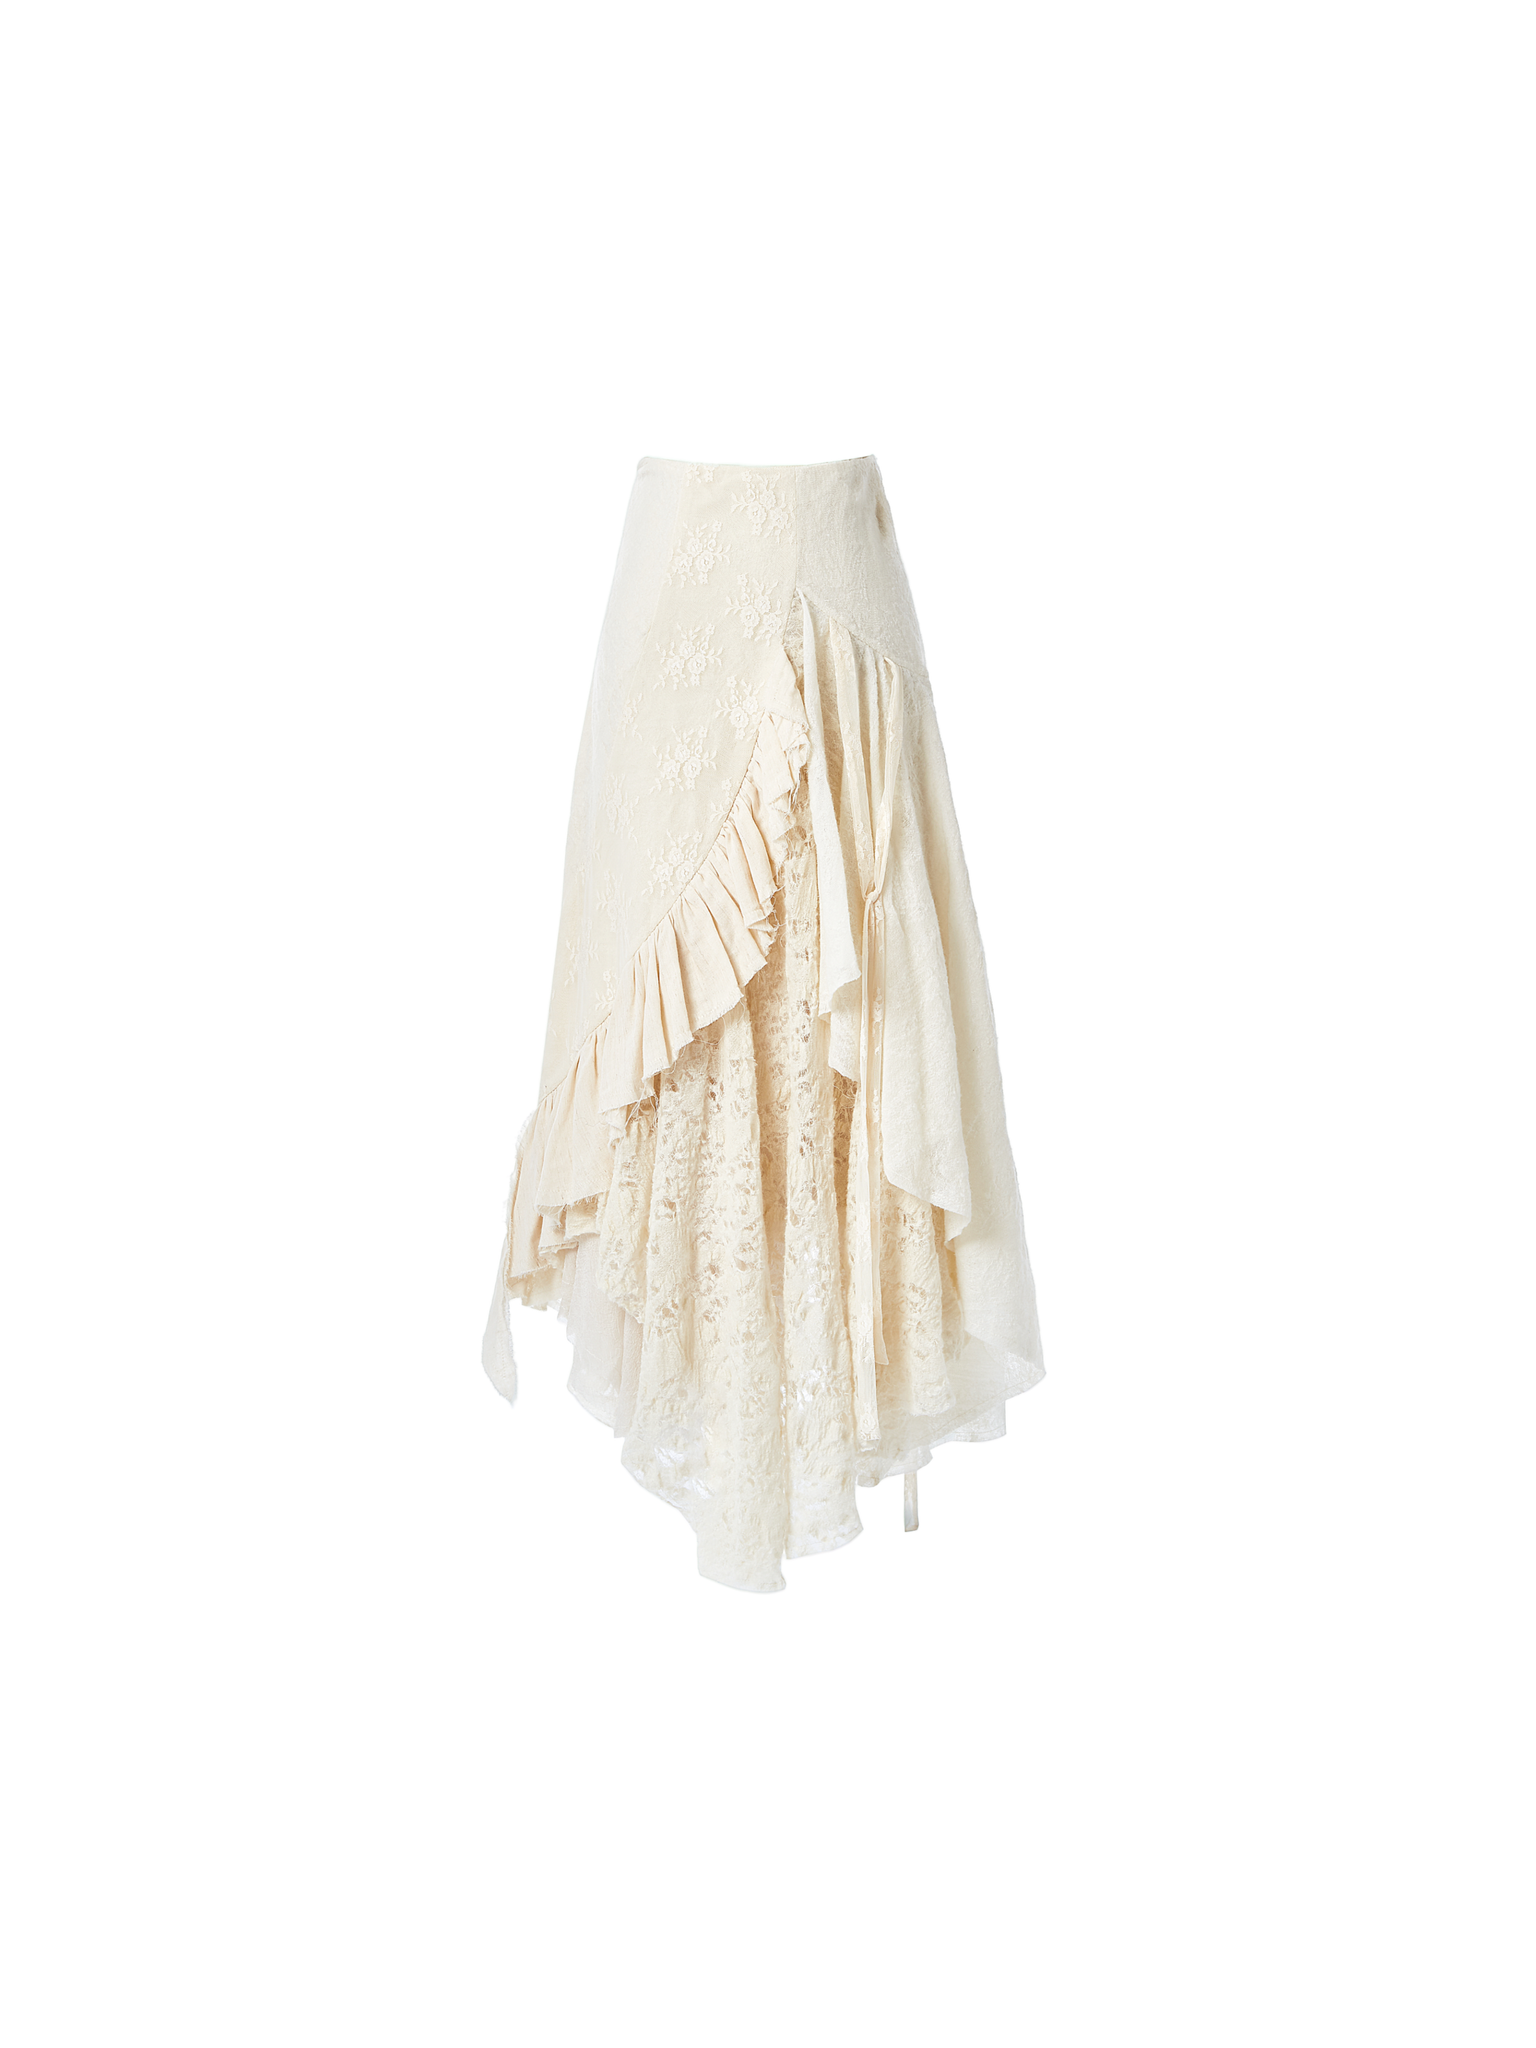 White Lace Deconstructed Skirt